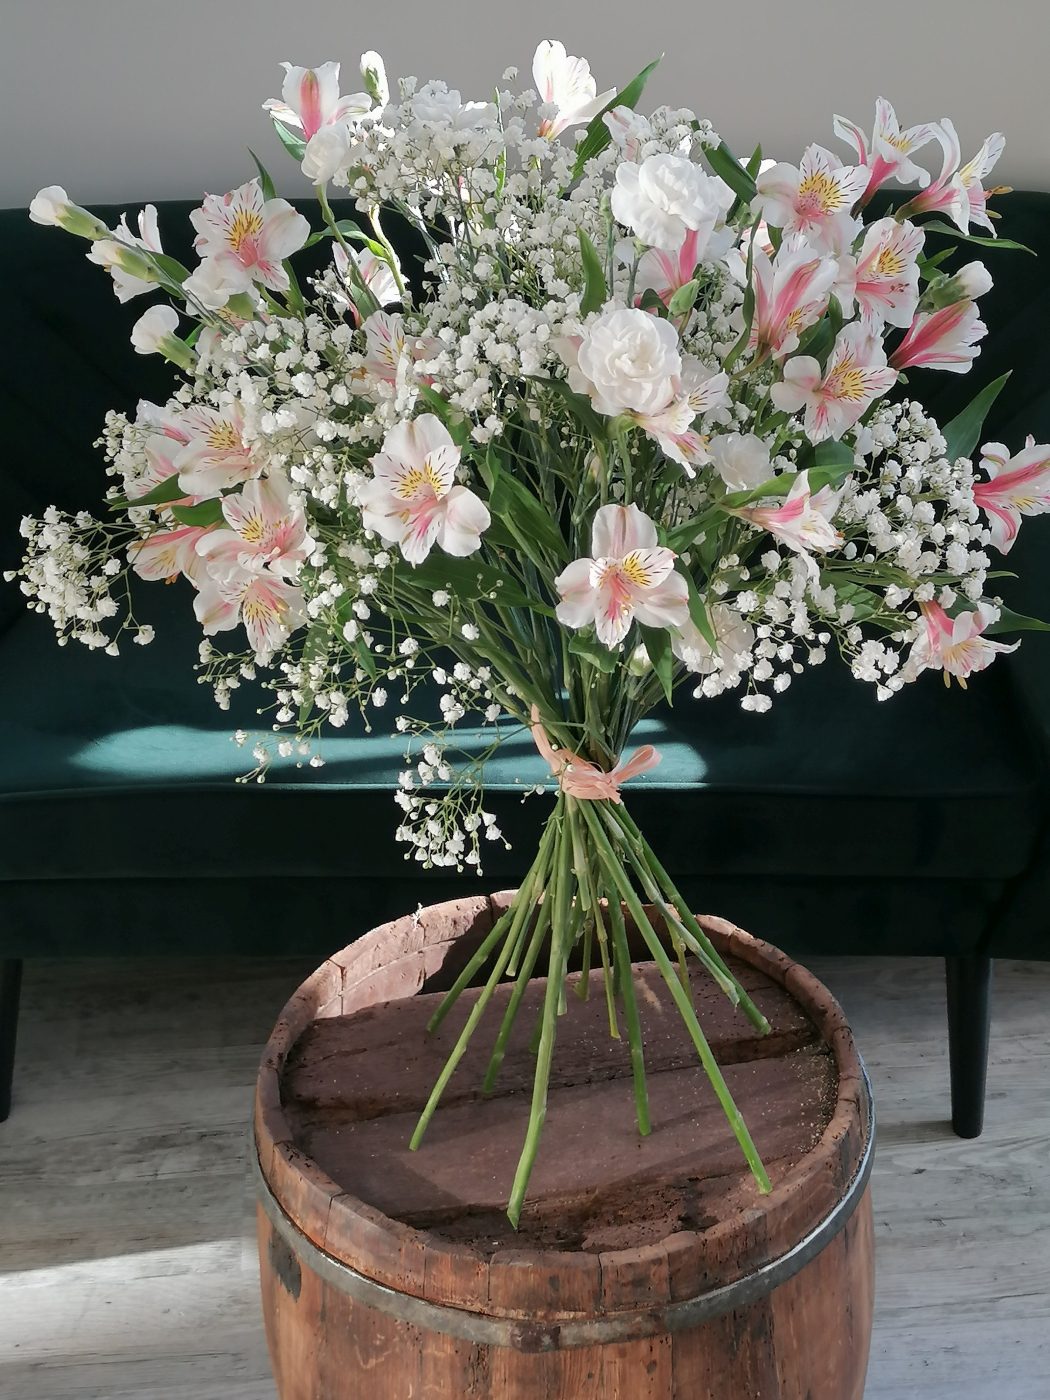 The idyllic bouquet is a light and airy proposal of a bouquet for any occasion. It is characterised by its minimalist form. The alstroemeria and carnations are in the clouds.